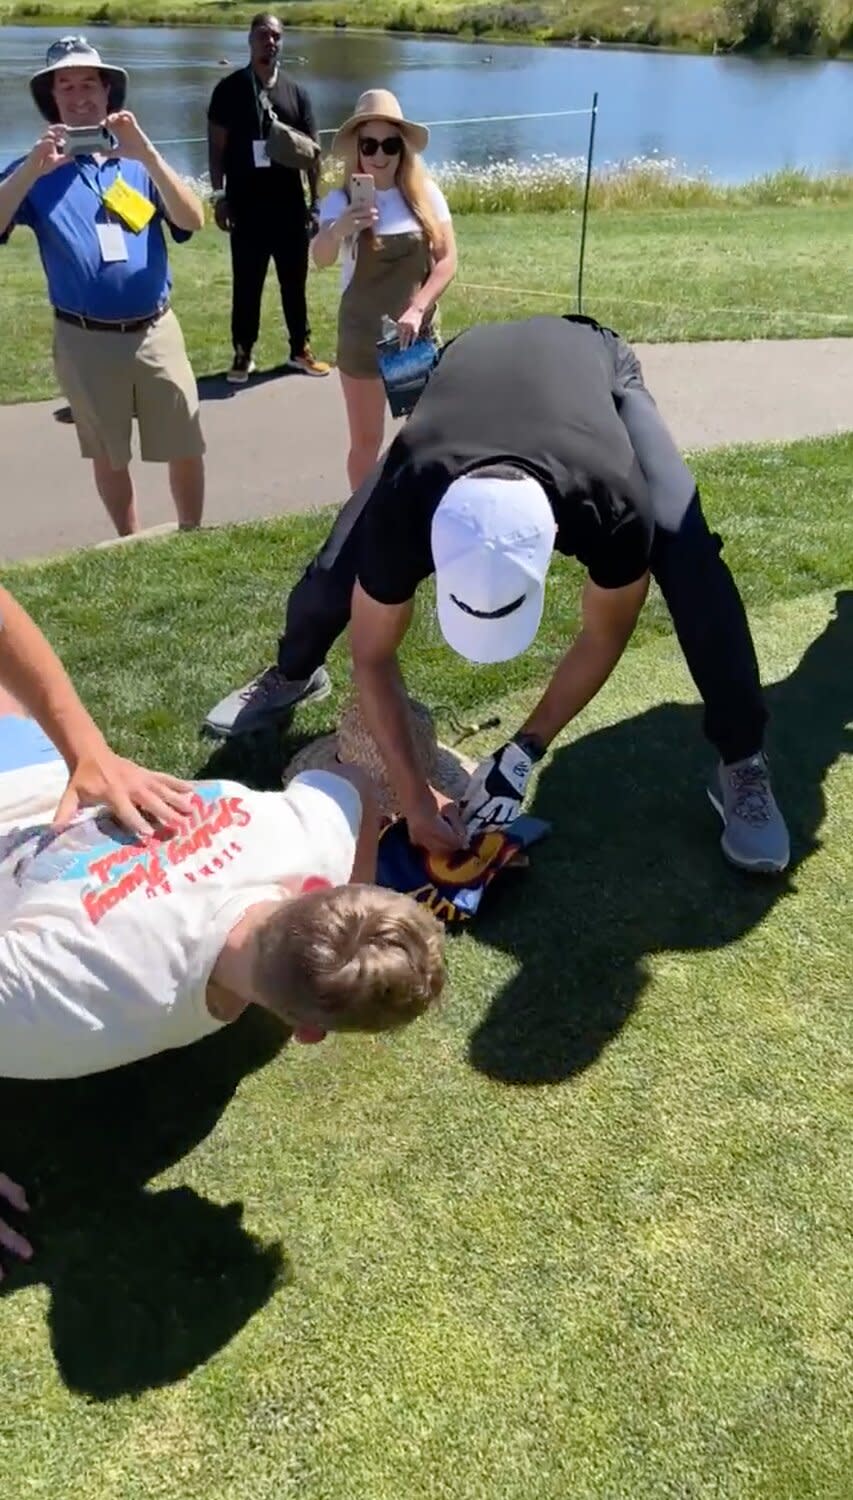 Steph Curry Gets Fan to do 30 Pushups for his Autograph